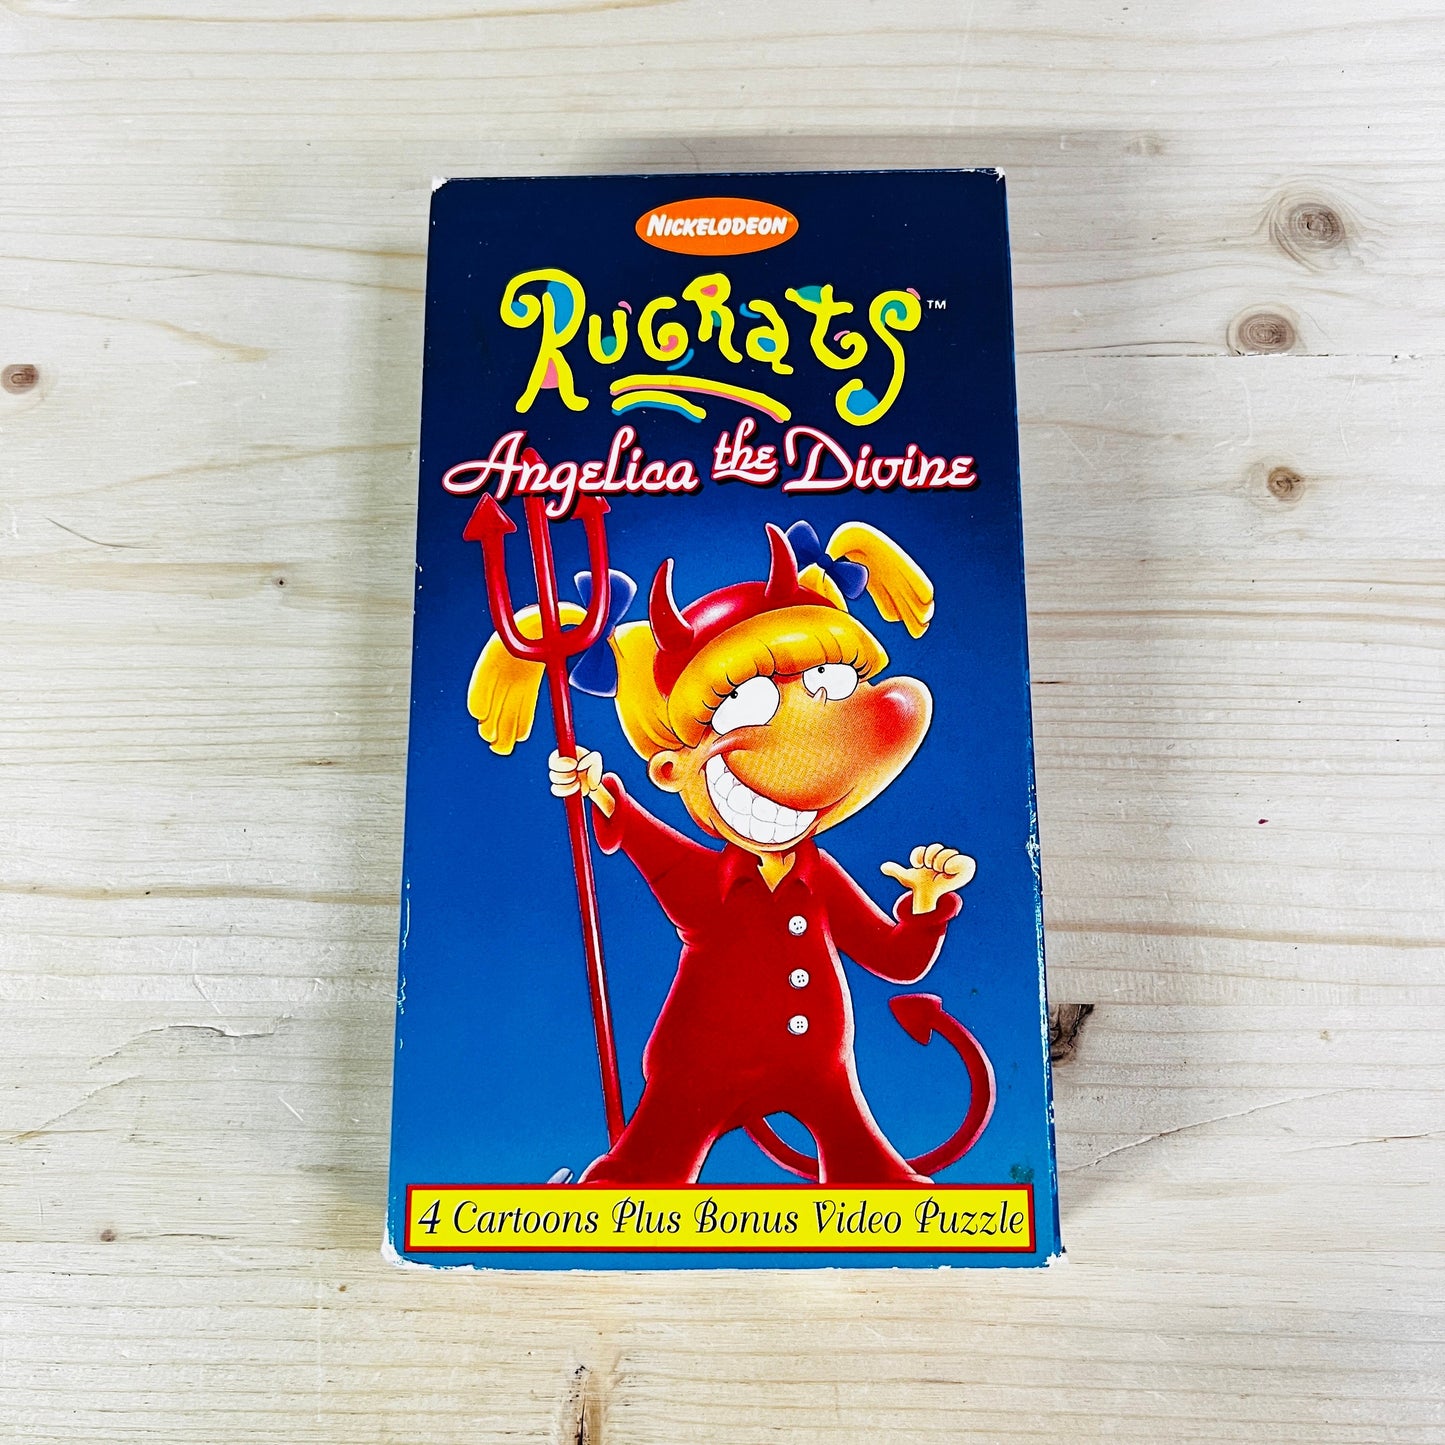 Rugrats Angelica the Divine VHS Tape